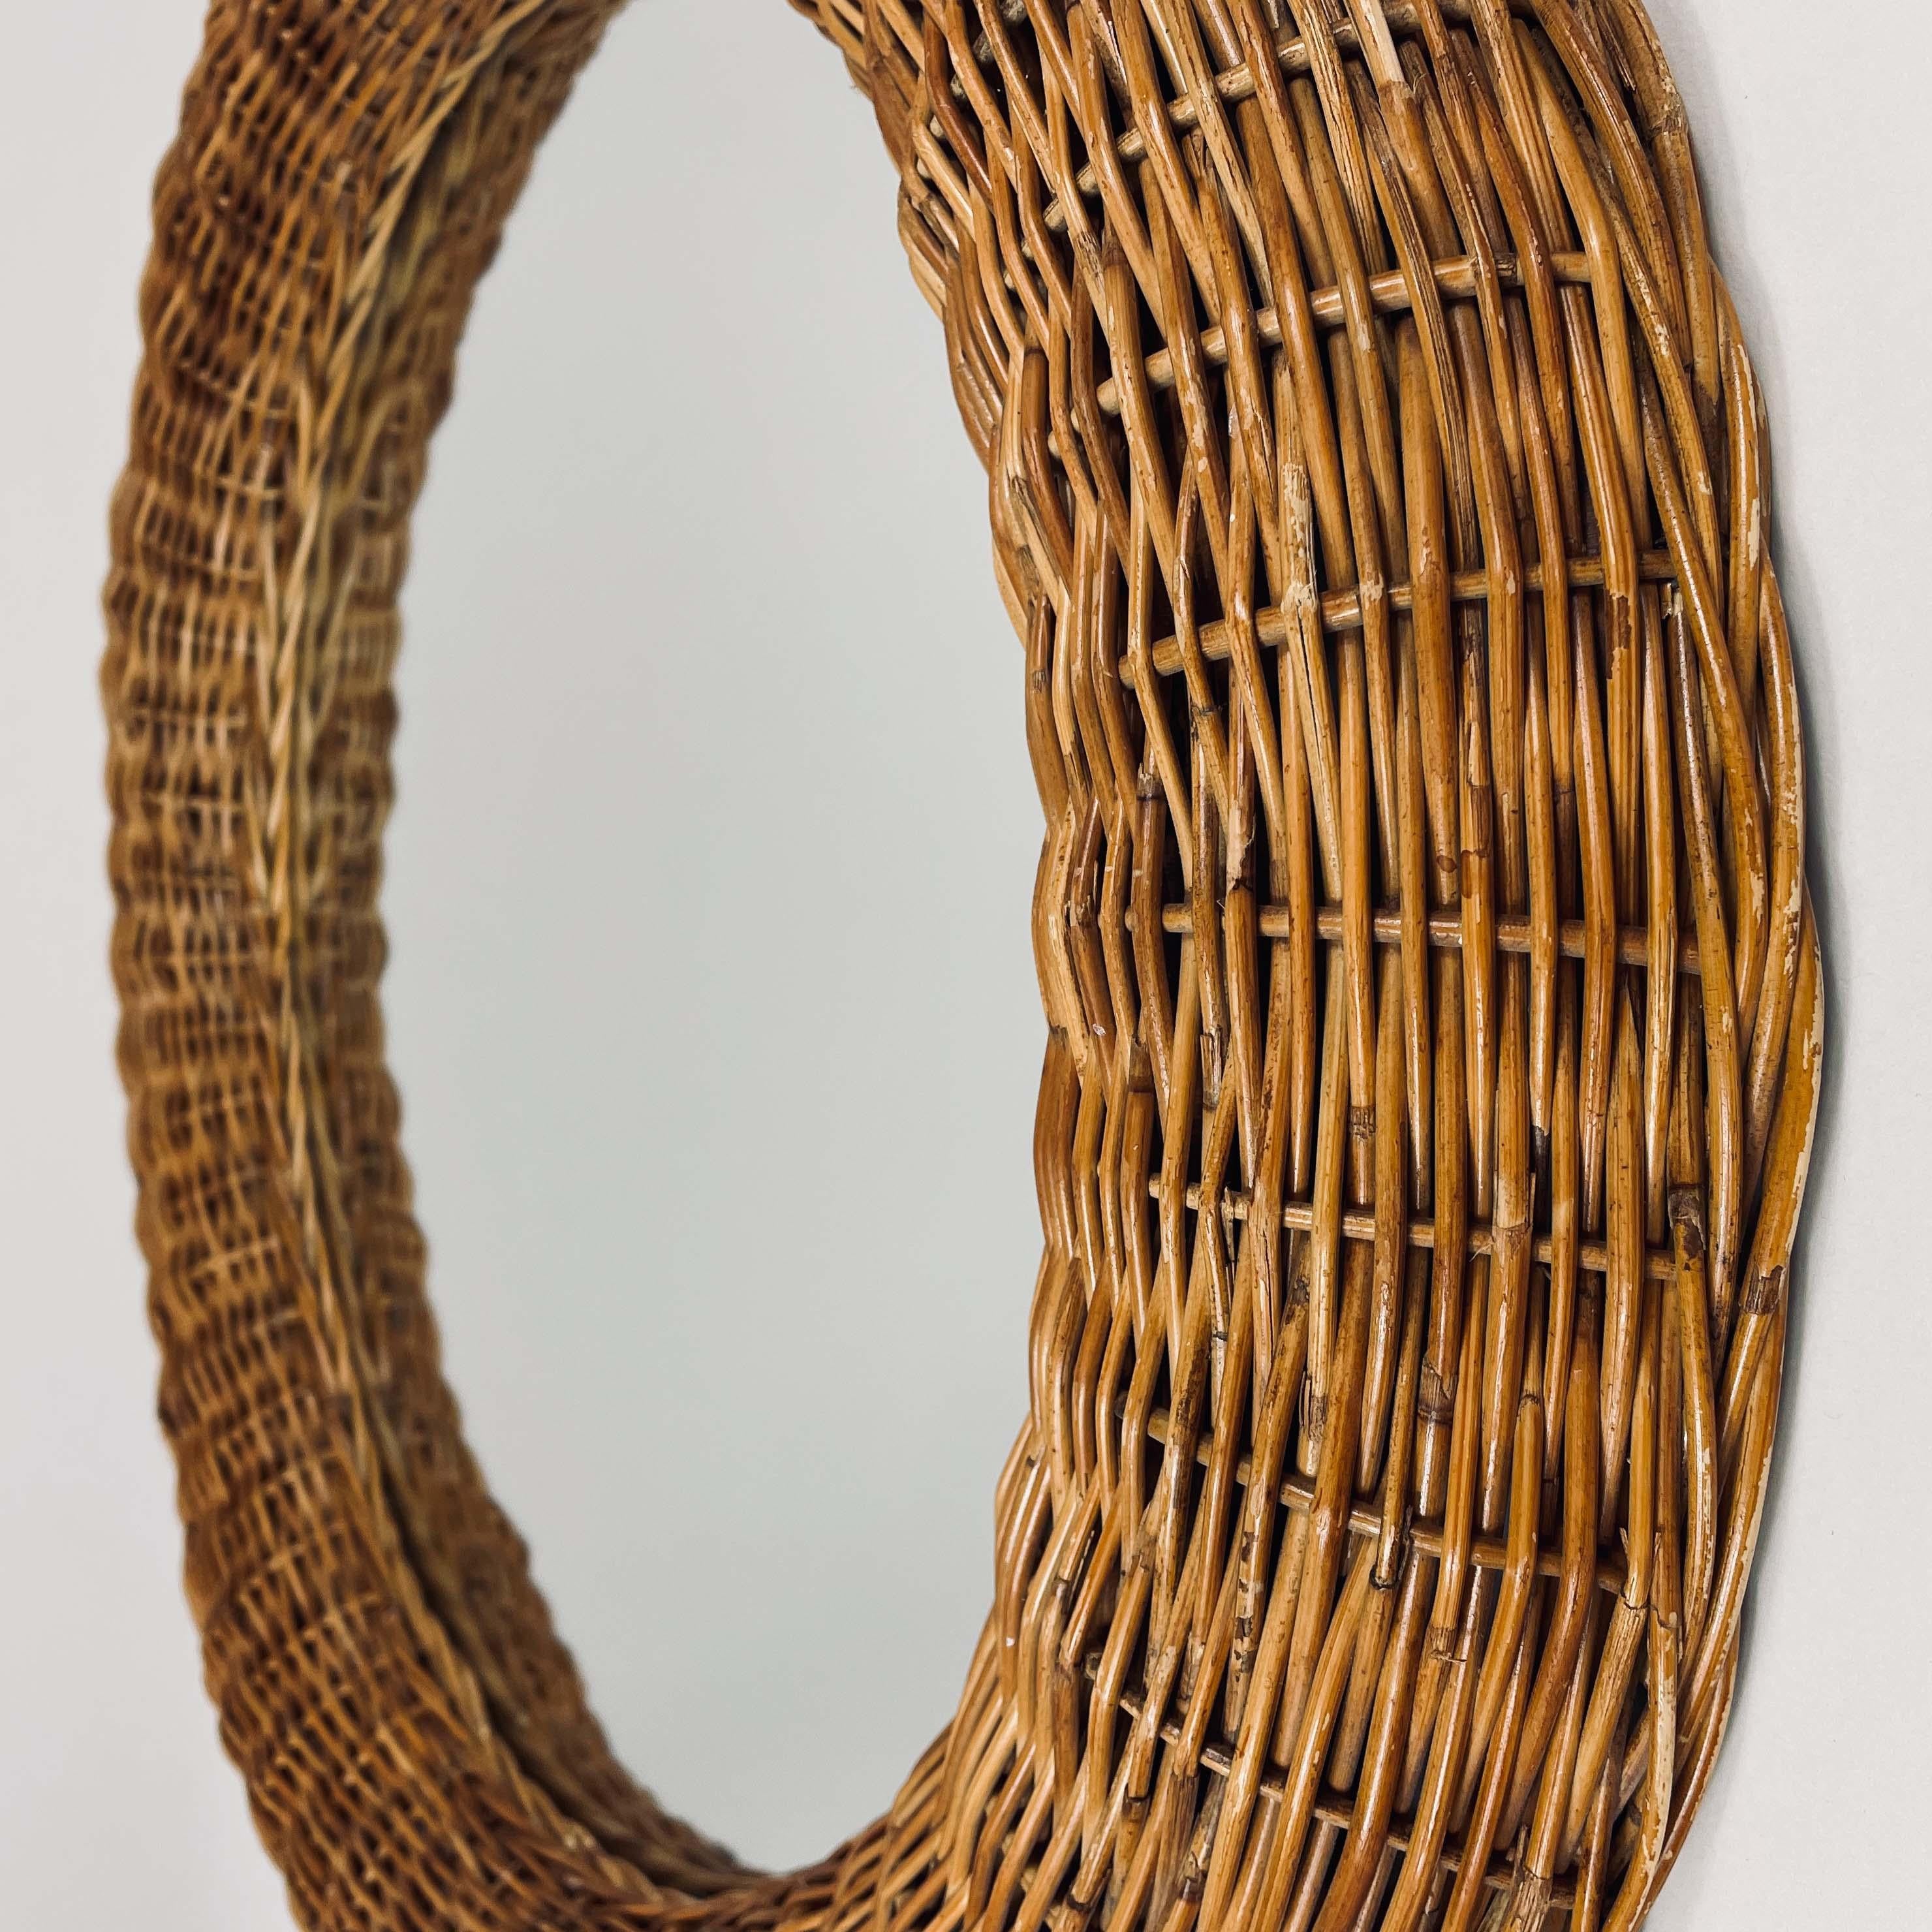 Riviera Style Round Woven Rattan Mirror, France 1950s For Sale 7